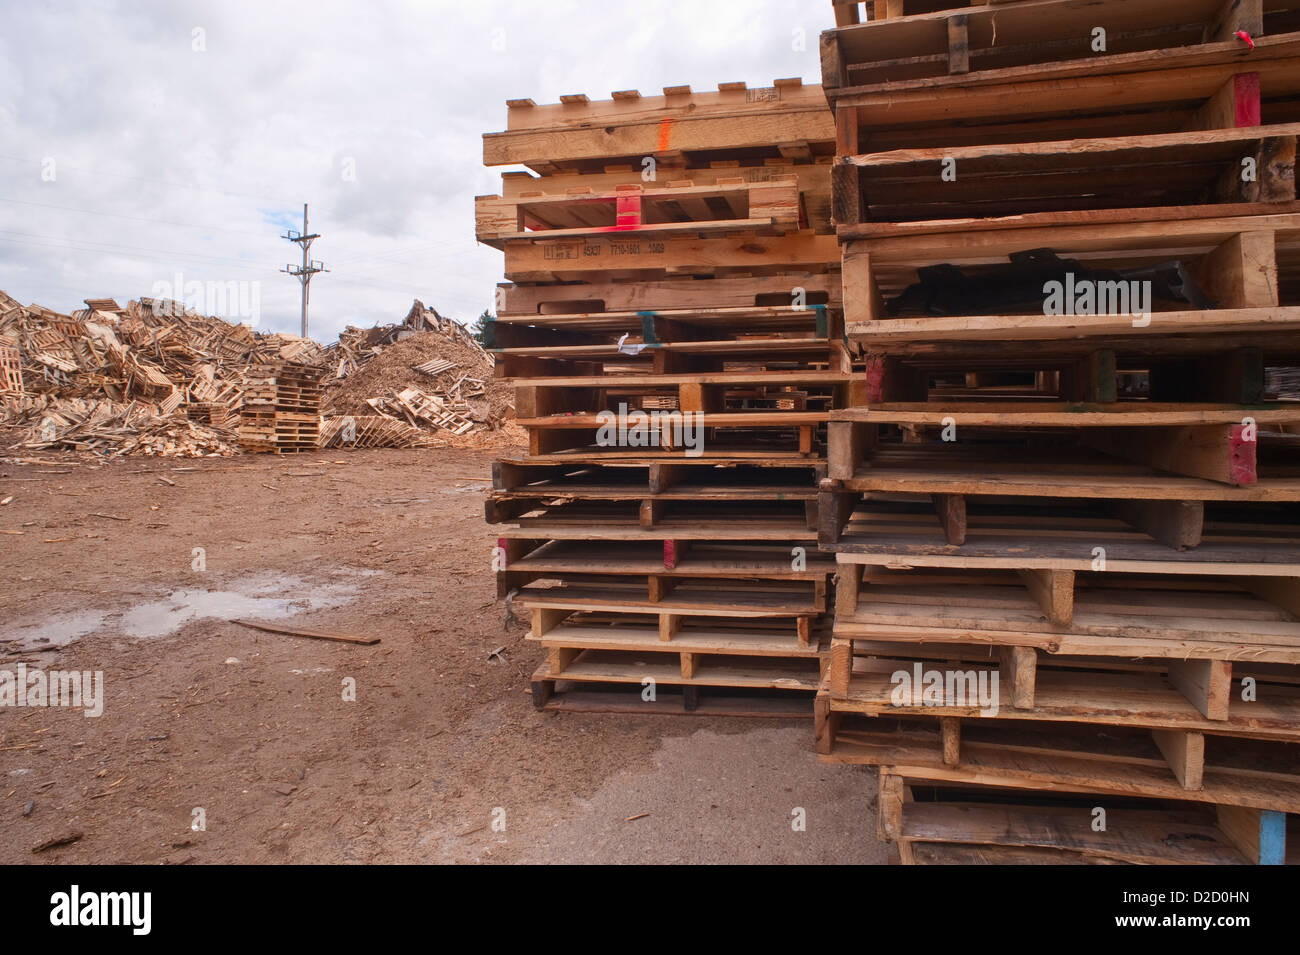 Stacks of pallets at pallet recycling business in Michigan, USA Stock Photo